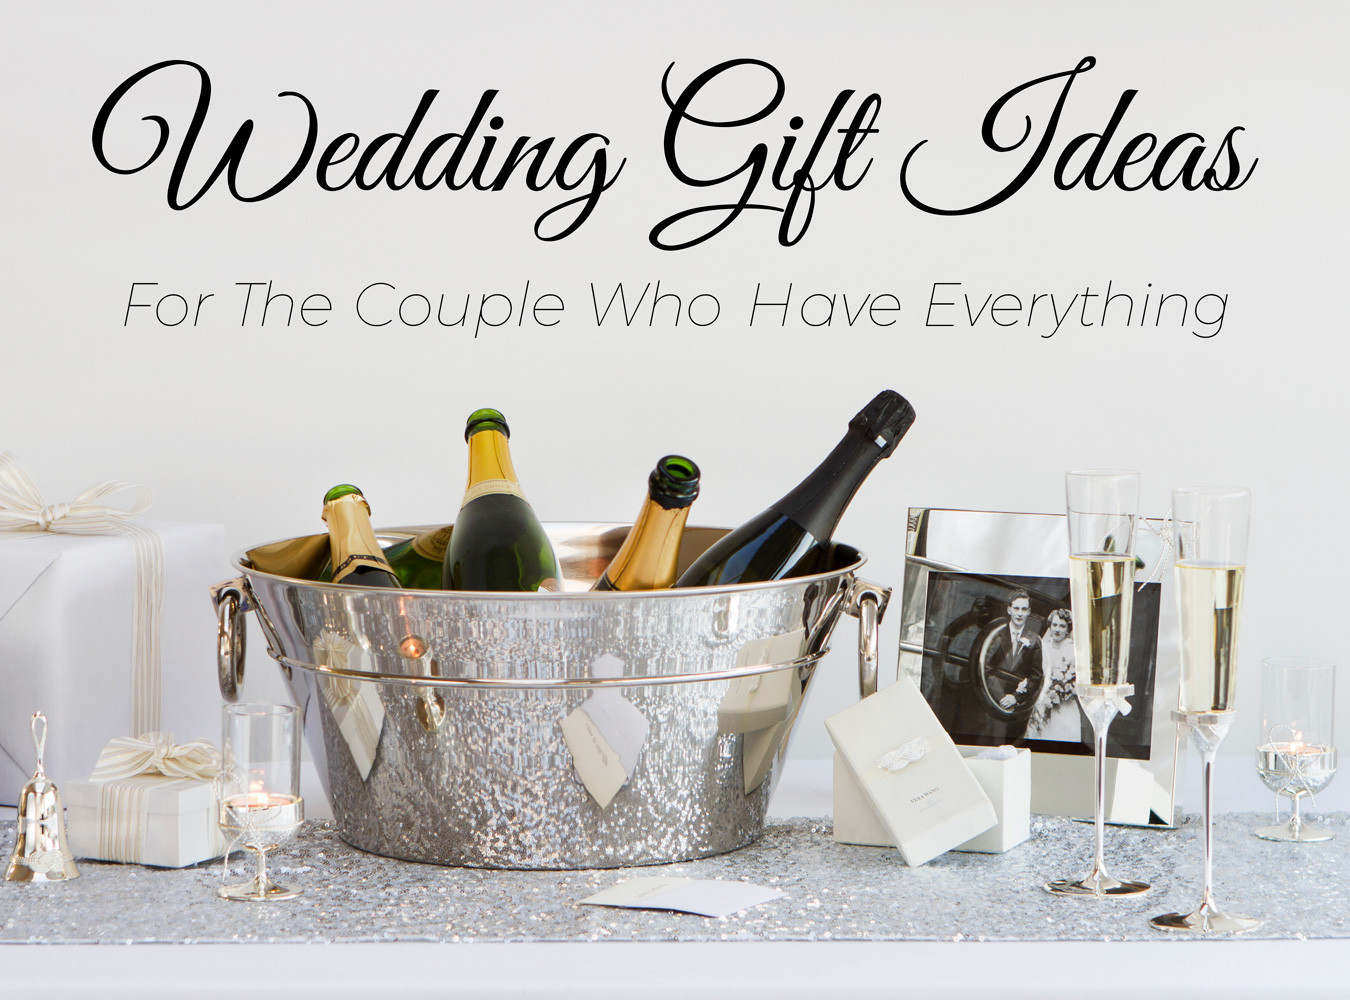 Gift Ideas For Elderly Couple
 5 Wedding Gift Ideas for the Couple Who Have Everything